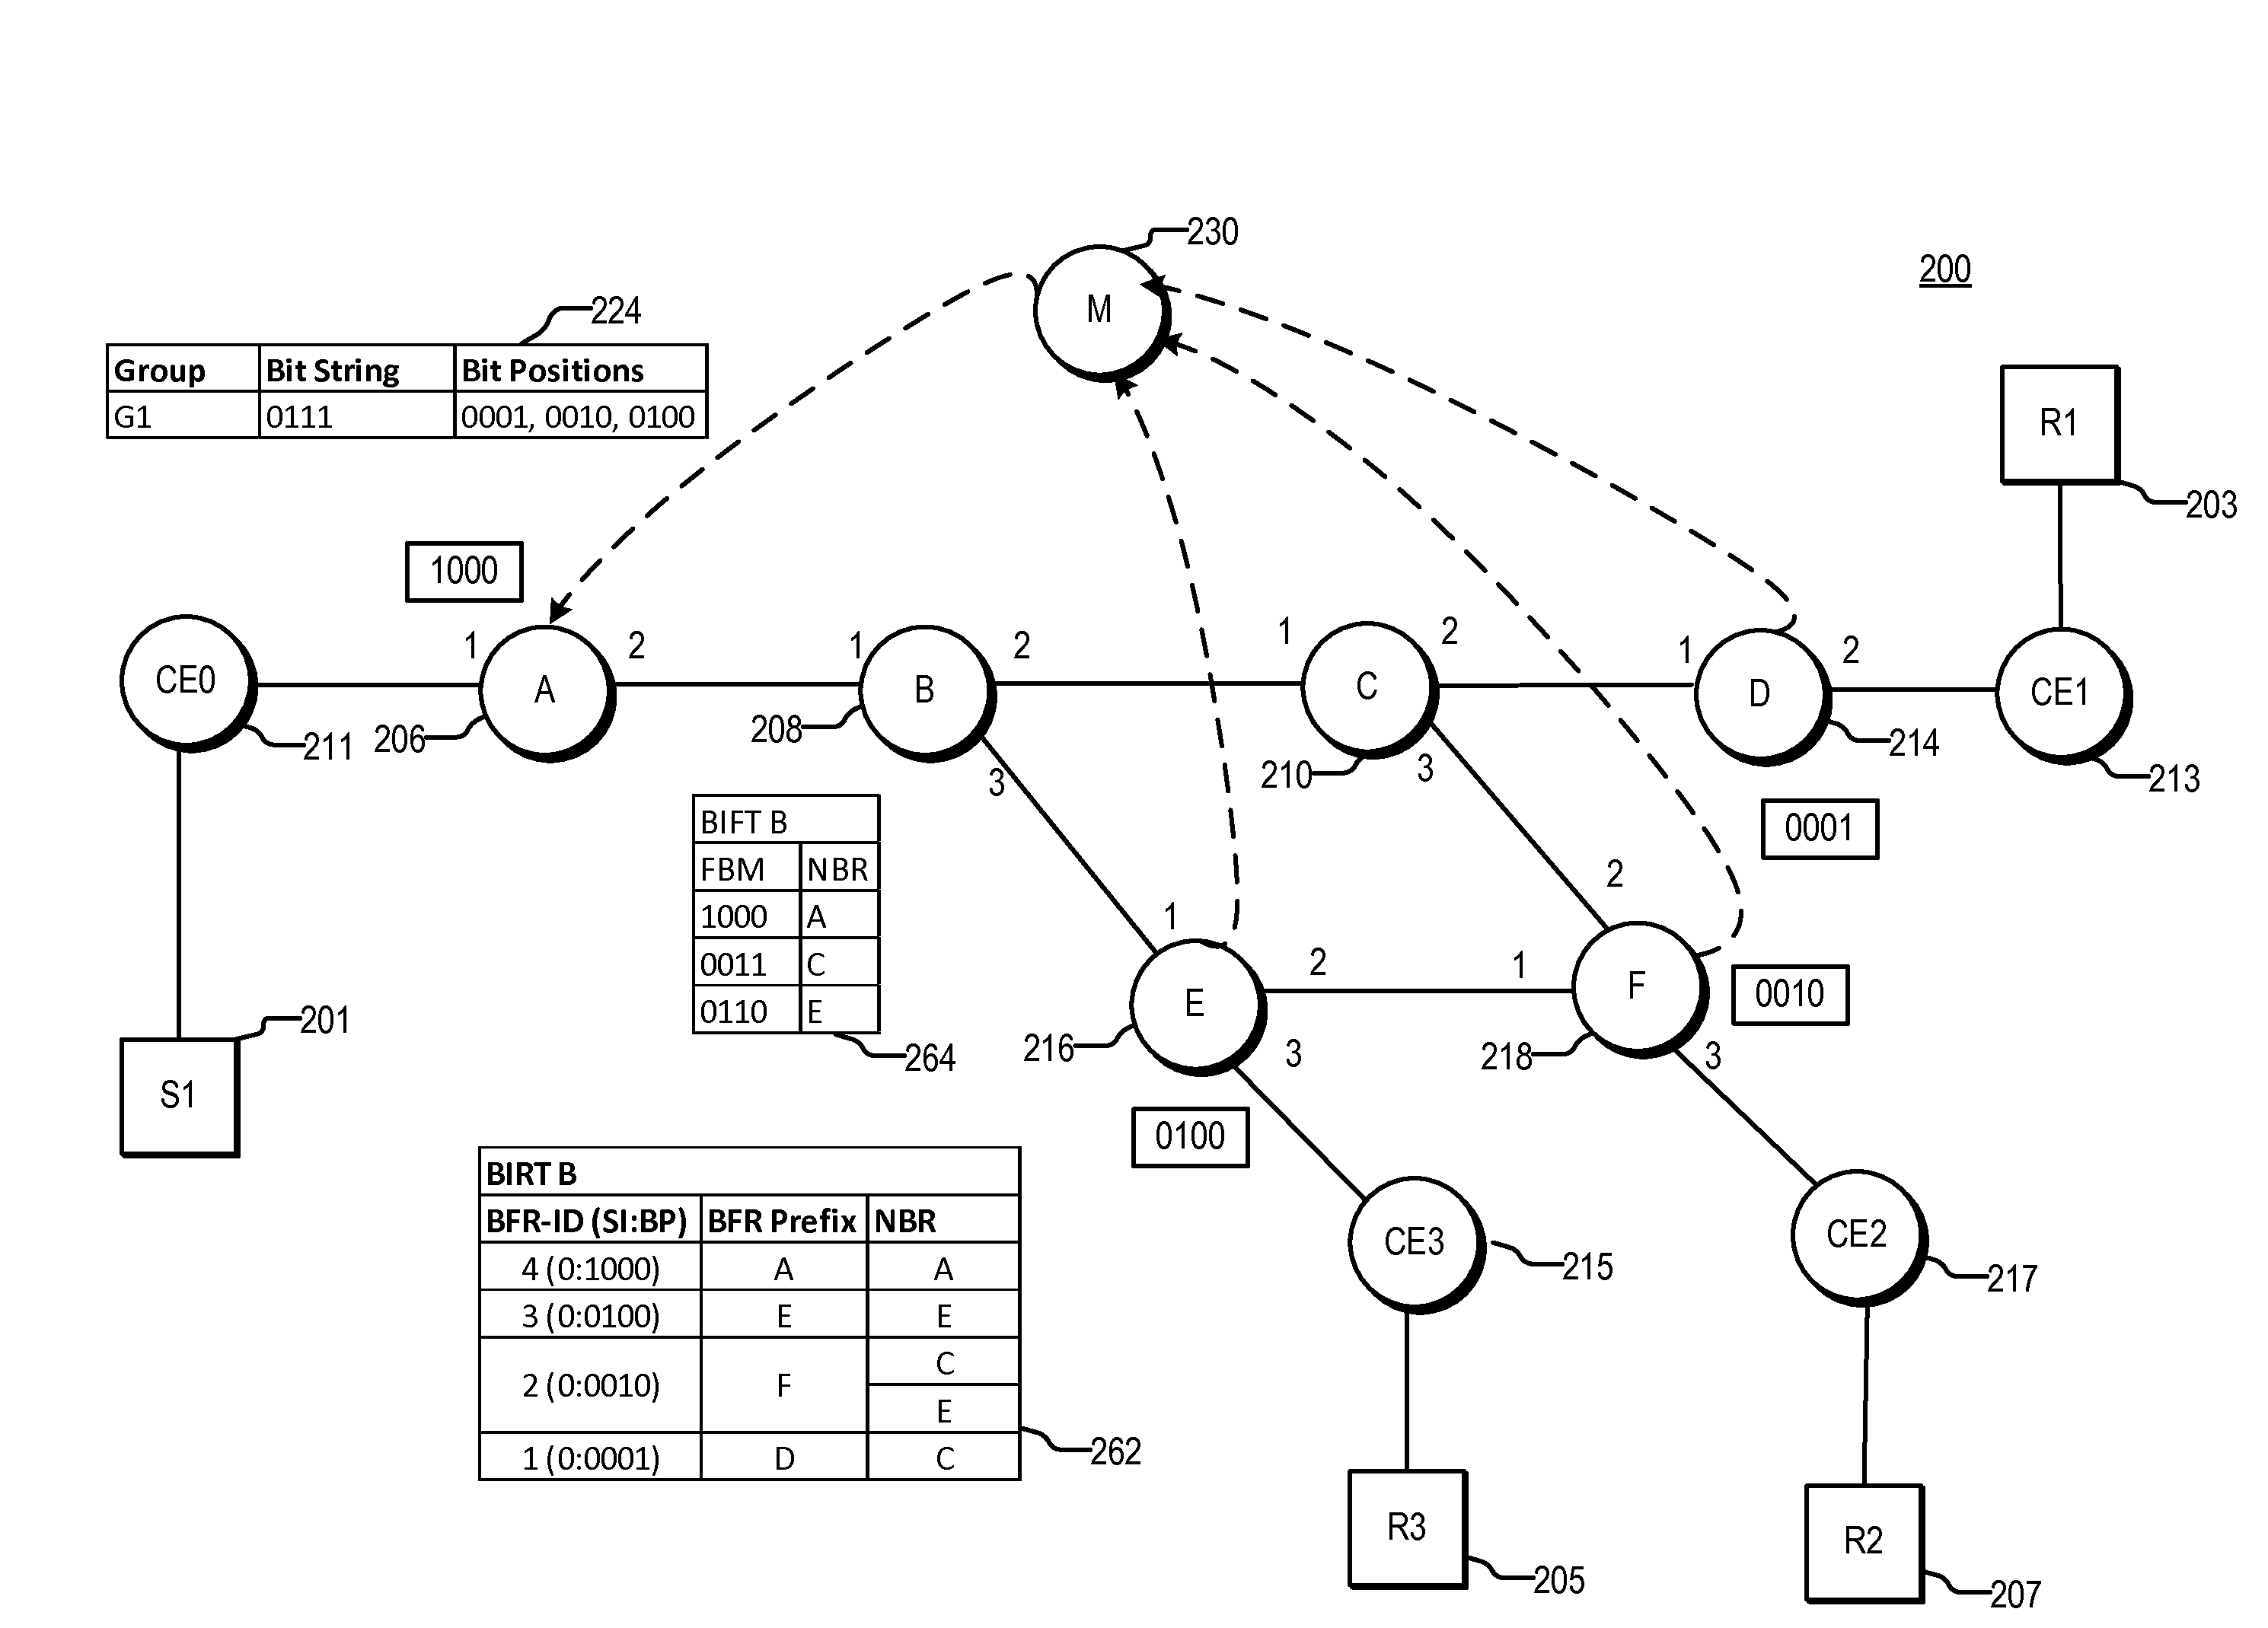 Equal Cost Multi-path With Bit Indexed Explicit Replication